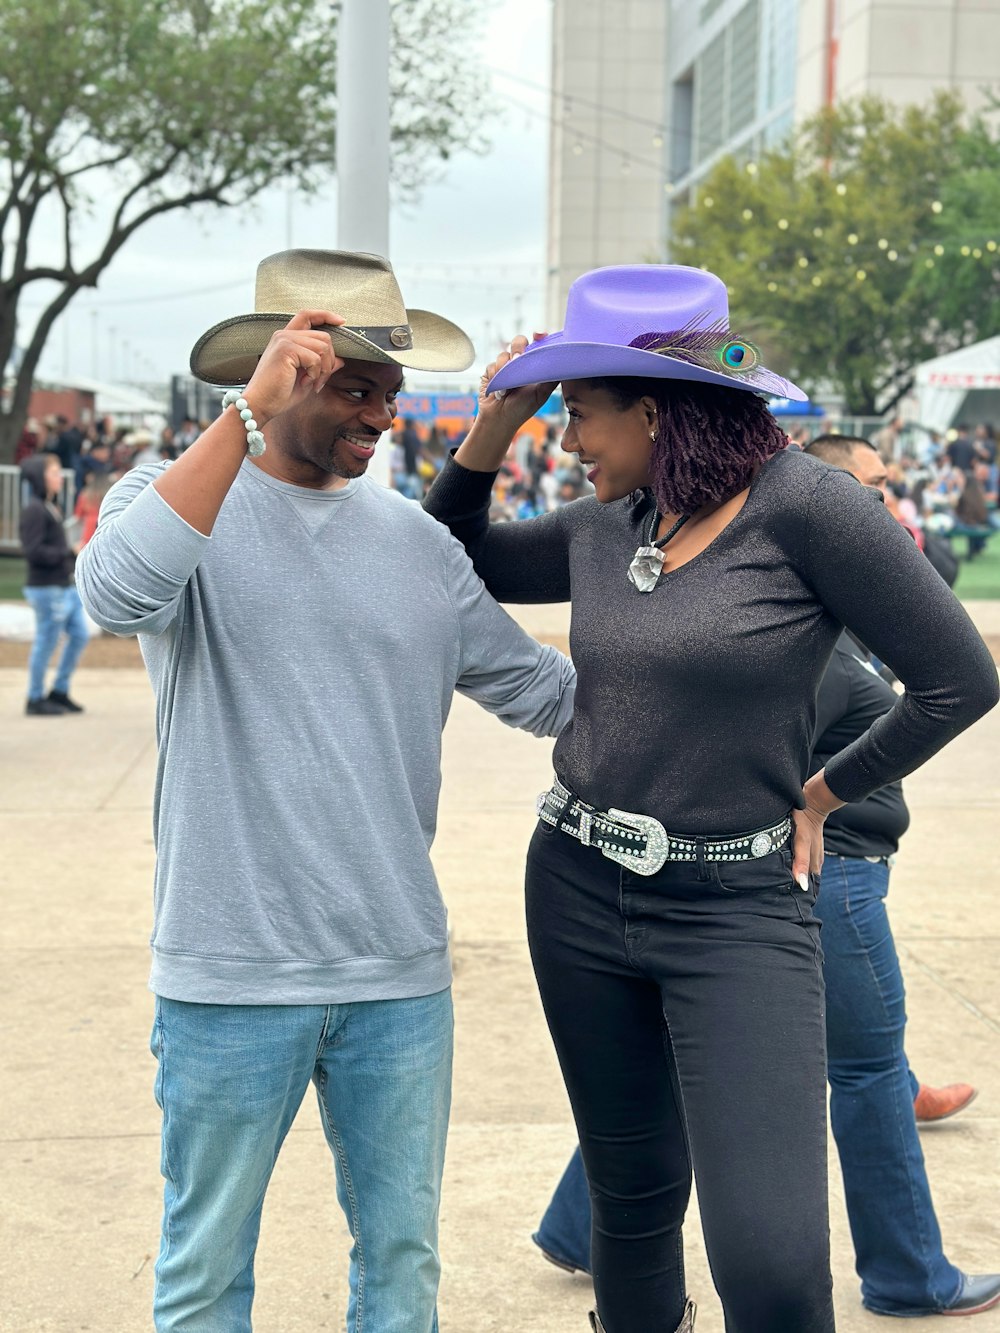 a man standing next to a woman wearing a purple hat